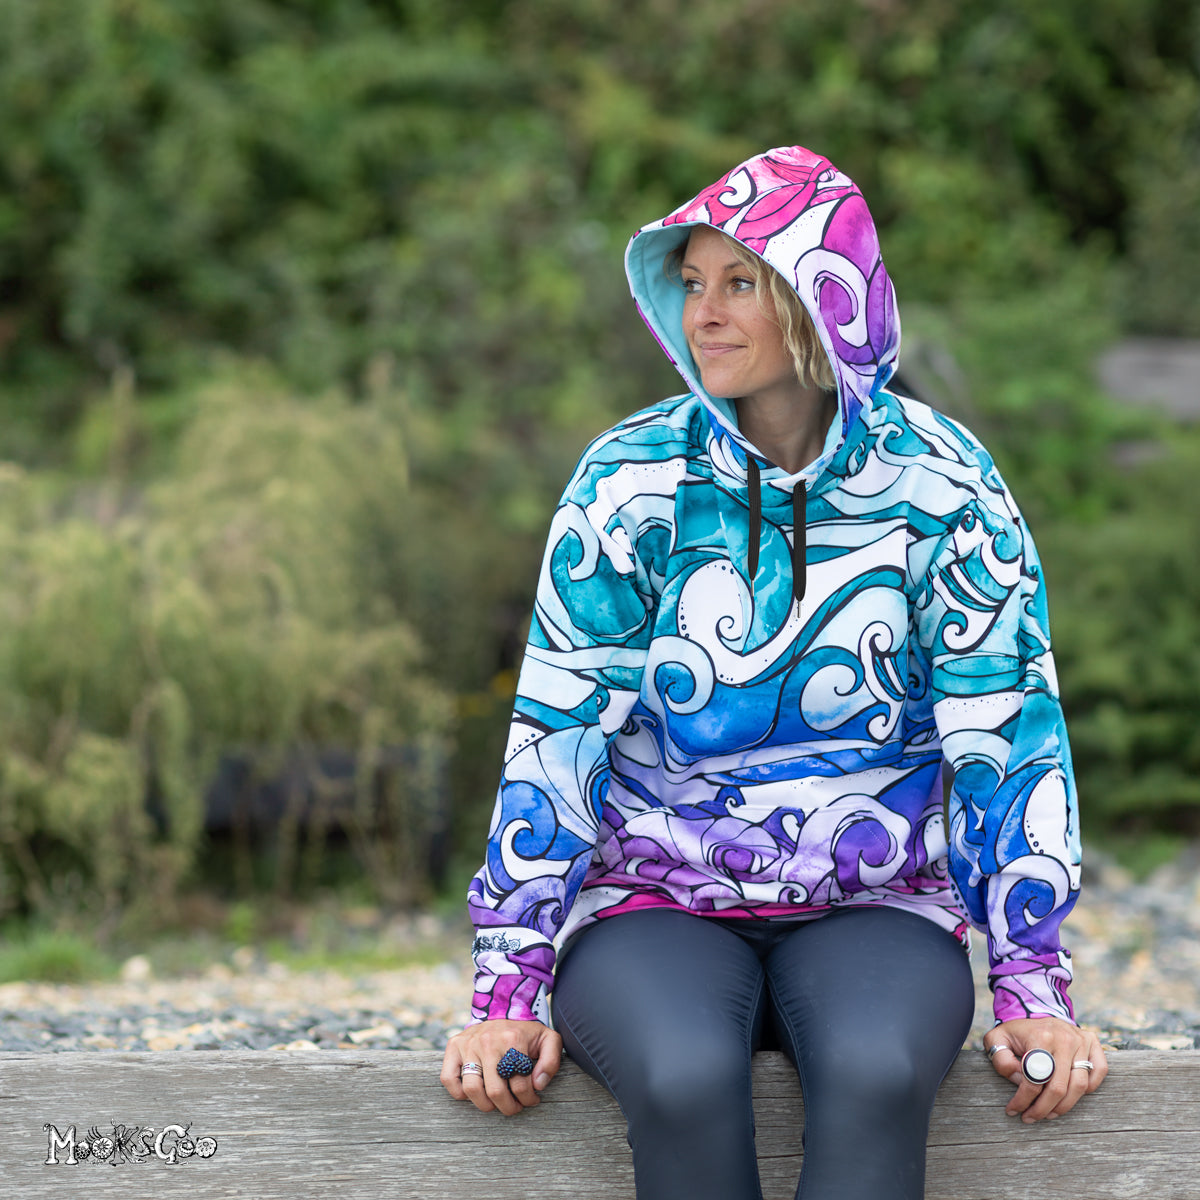 Model Michelle Lott wearing a size L unisex recycled rainbow wave hoodie, illustrated and designed by MooksGoo. Phot taken by Julian Winslow at Shanklin seafront on the Isle of Wight. 